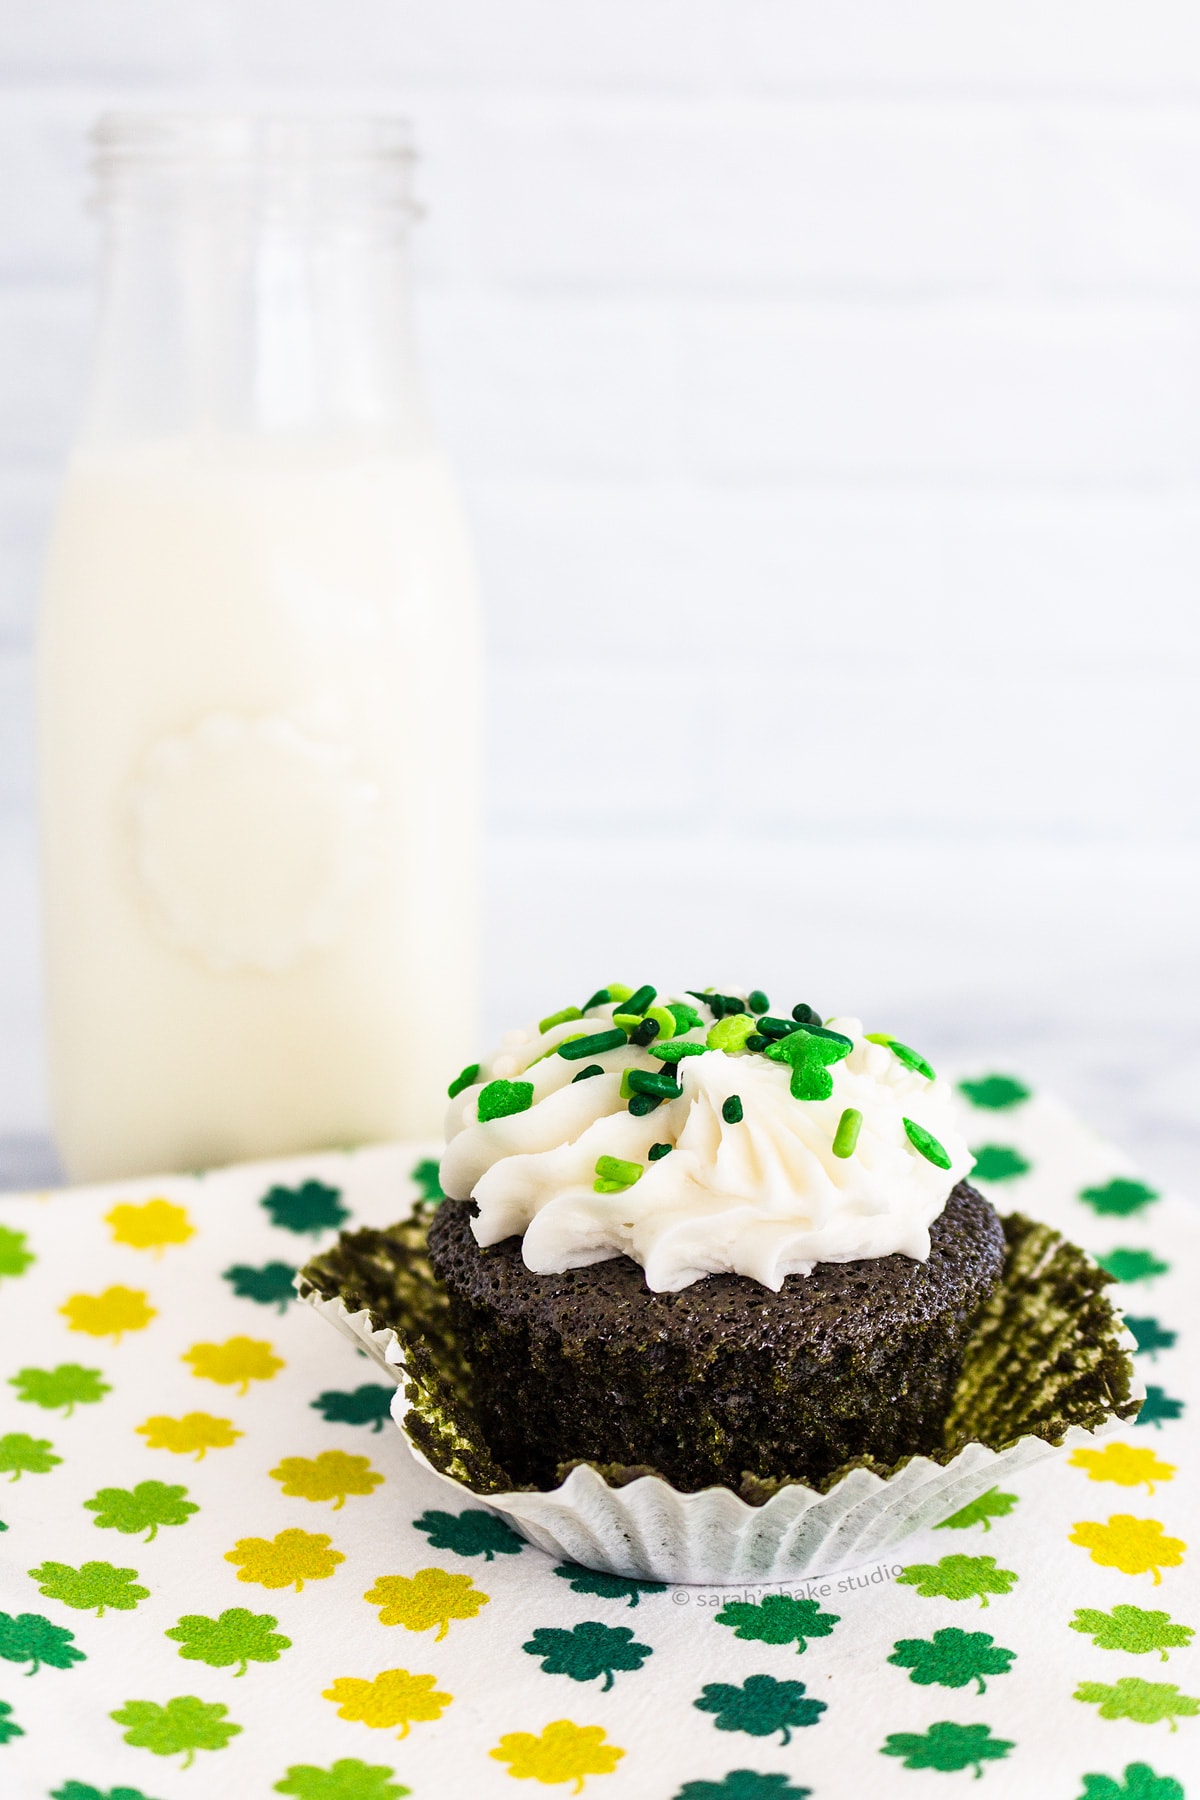 A bottle of milk with a semi-unwrapped Green Velvet Cupcake sitting in front of it.